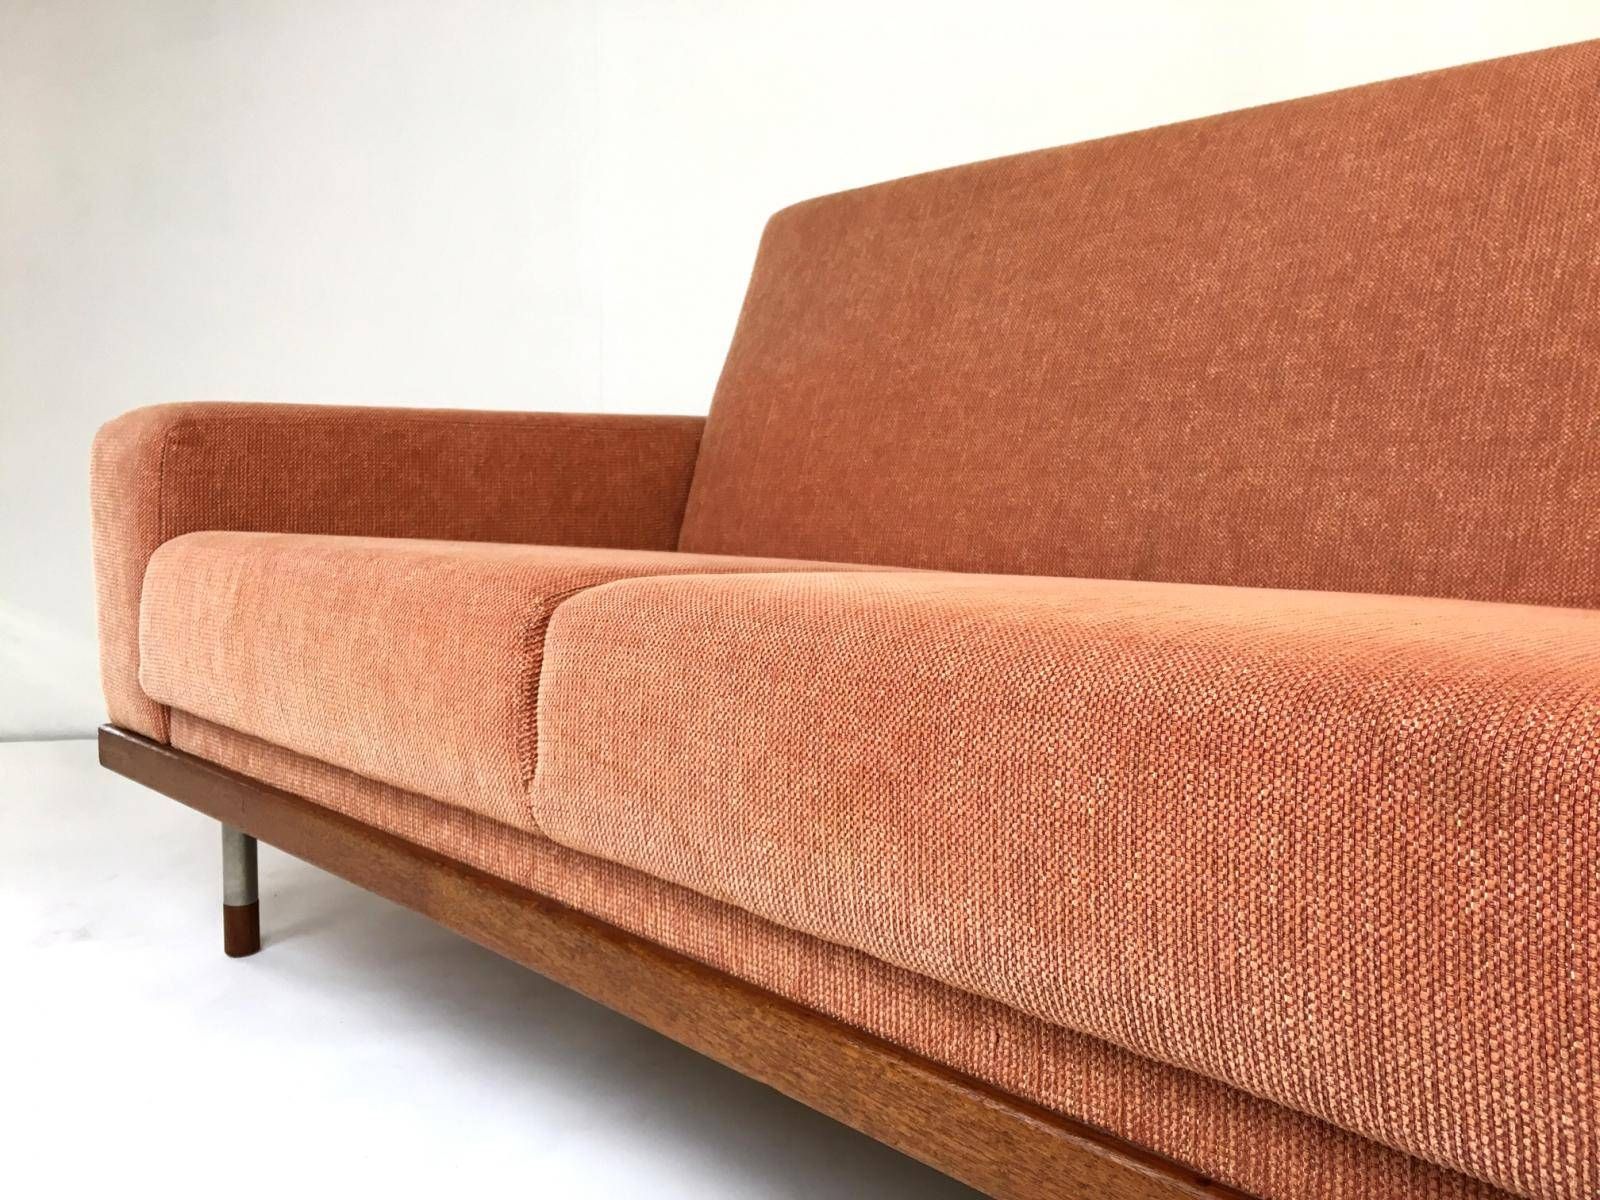 Teak Four Seater Sofa, 1960s For Sale At Pamono In Four Seater Sofas (View 9 of 30)